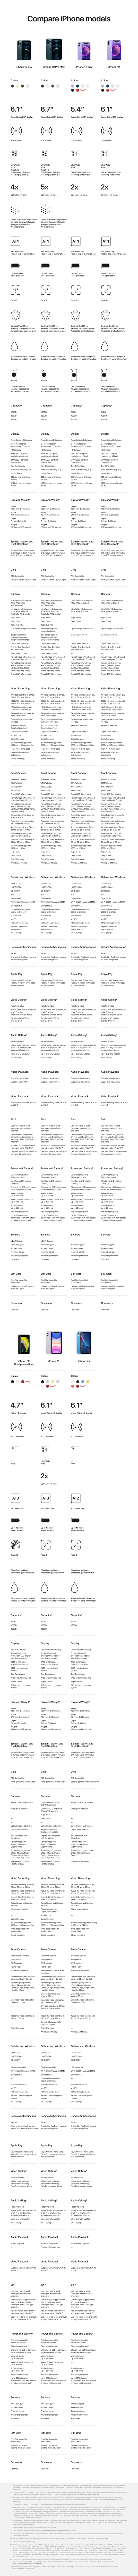 Compare iPhone 12 models